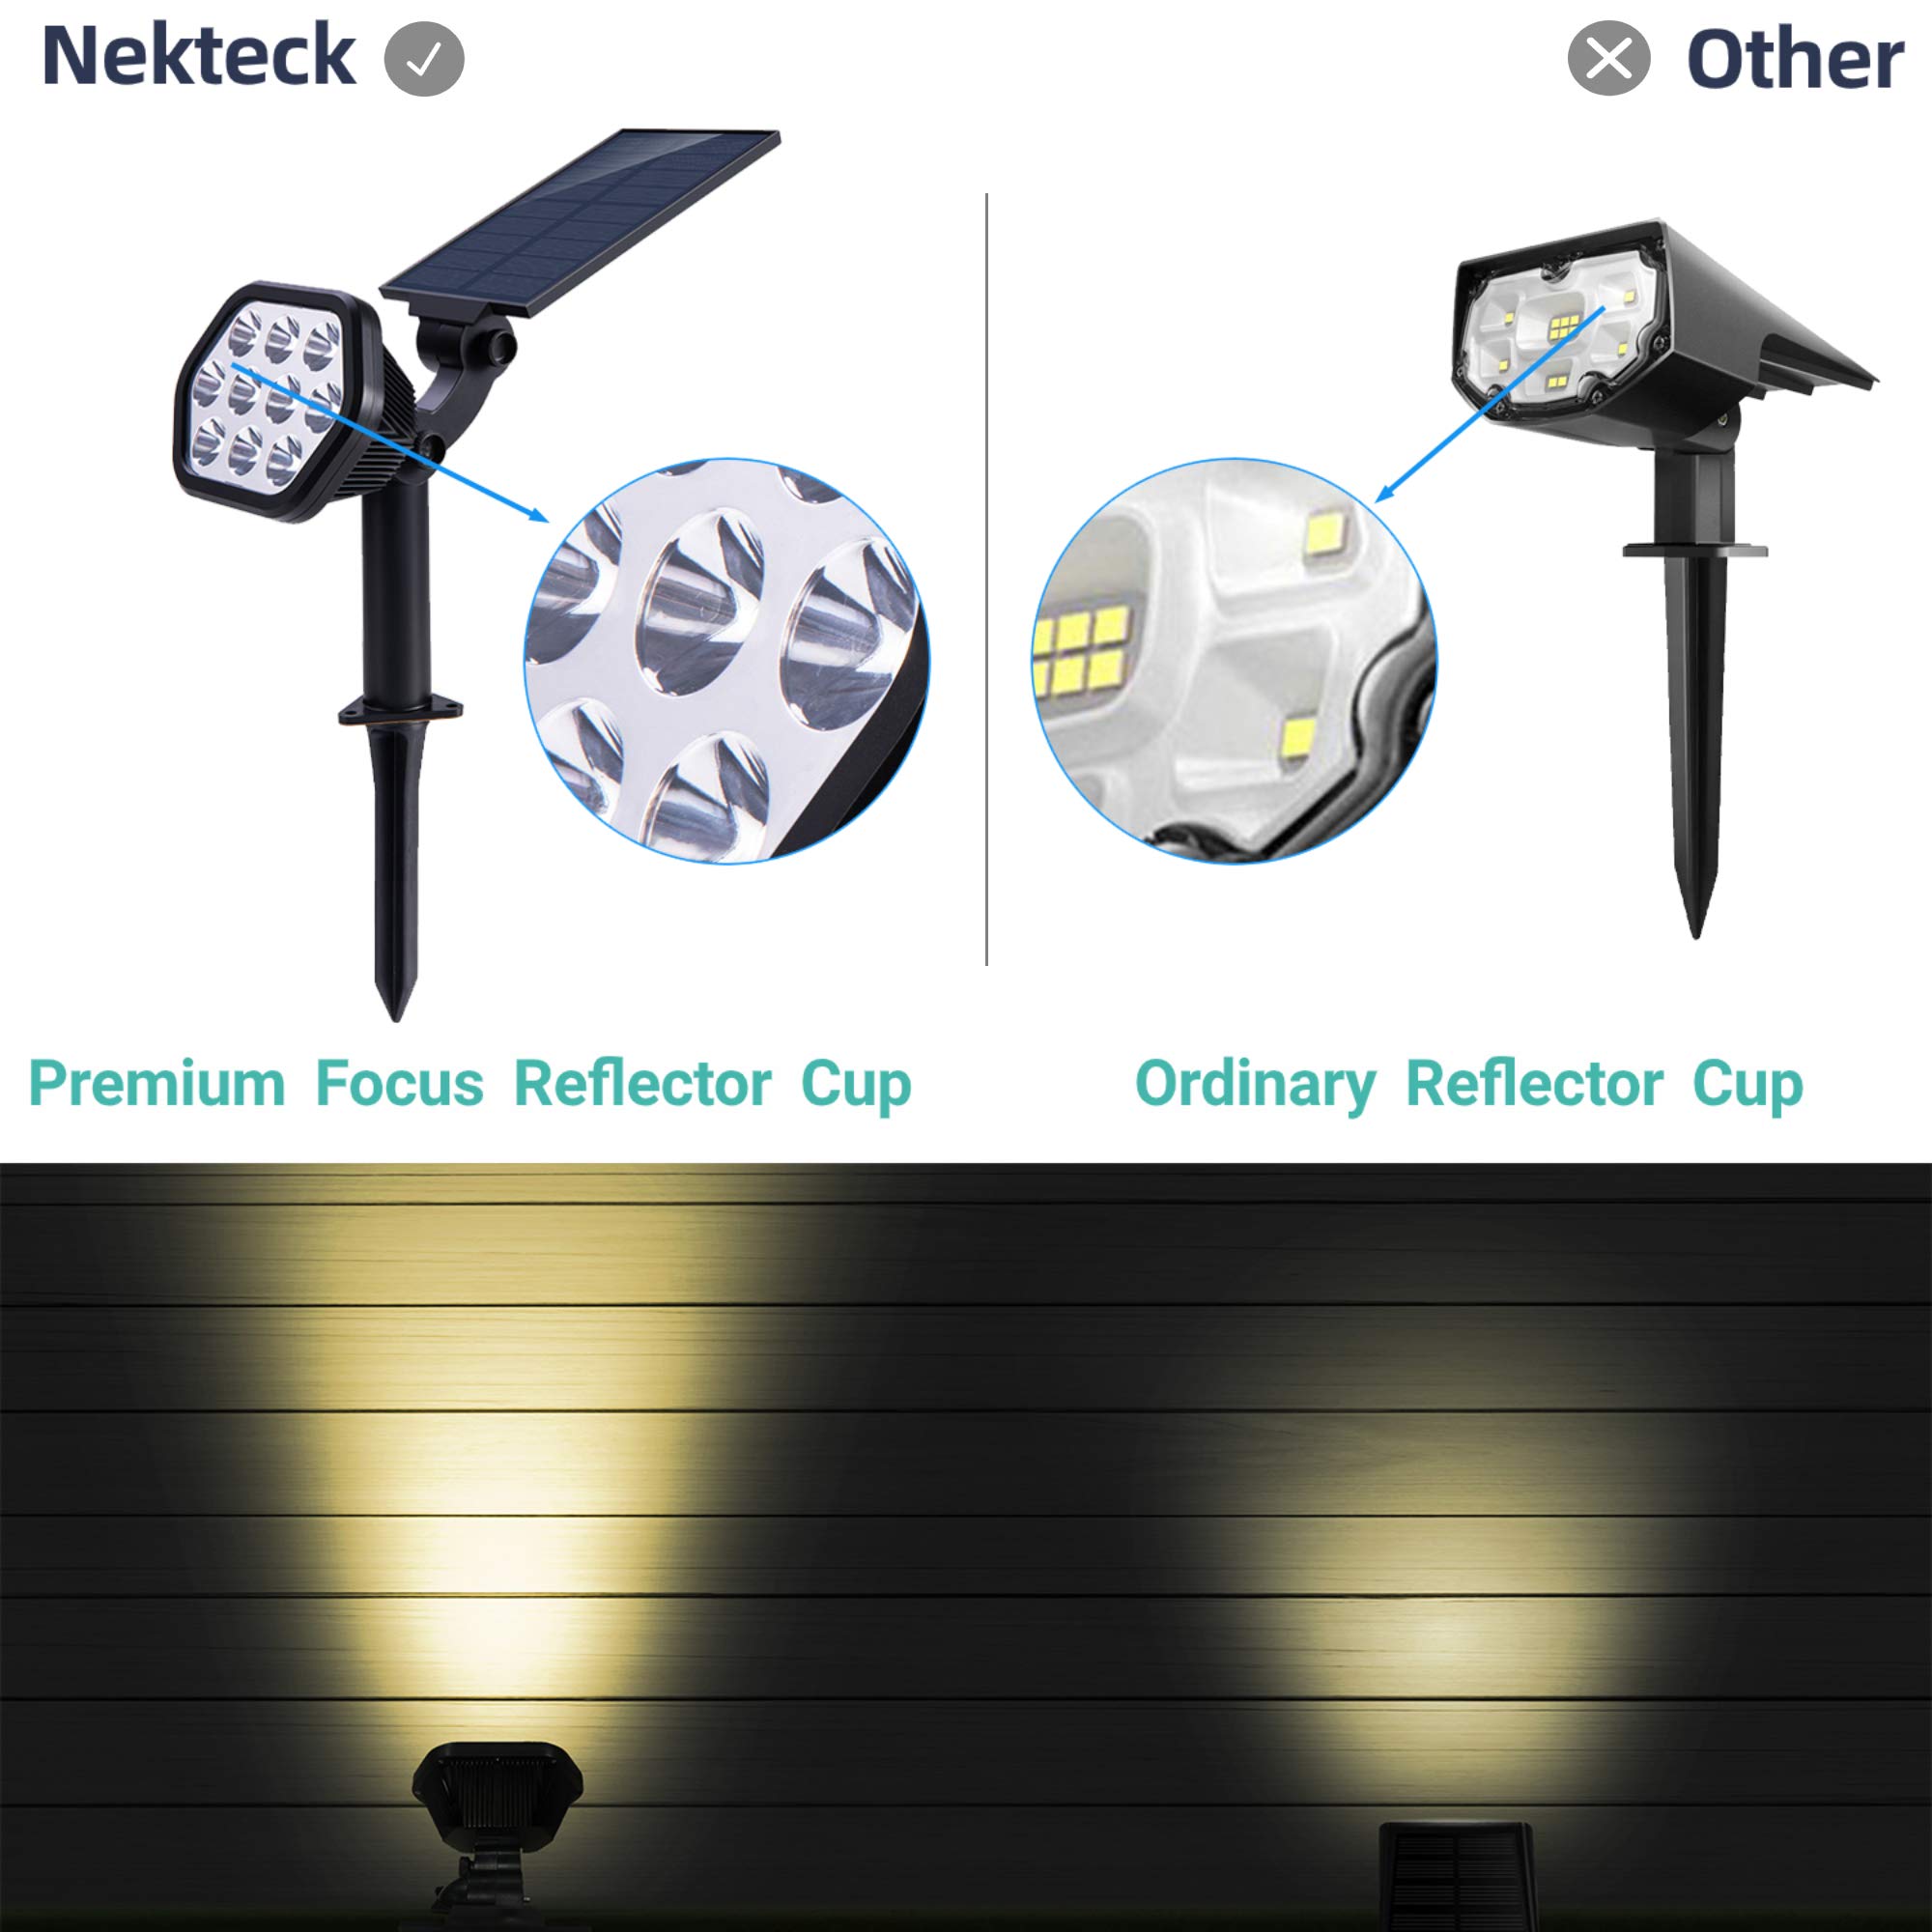 Nekteck Solar Lights Outdoor,10 LED Landscape Spotlights Powered Wall Lights 2-in-1 Wireless Adjustable Security Decoration Lighting for Yard Garden Walkway Porch Pool Driveway (4Pack, Warm White)